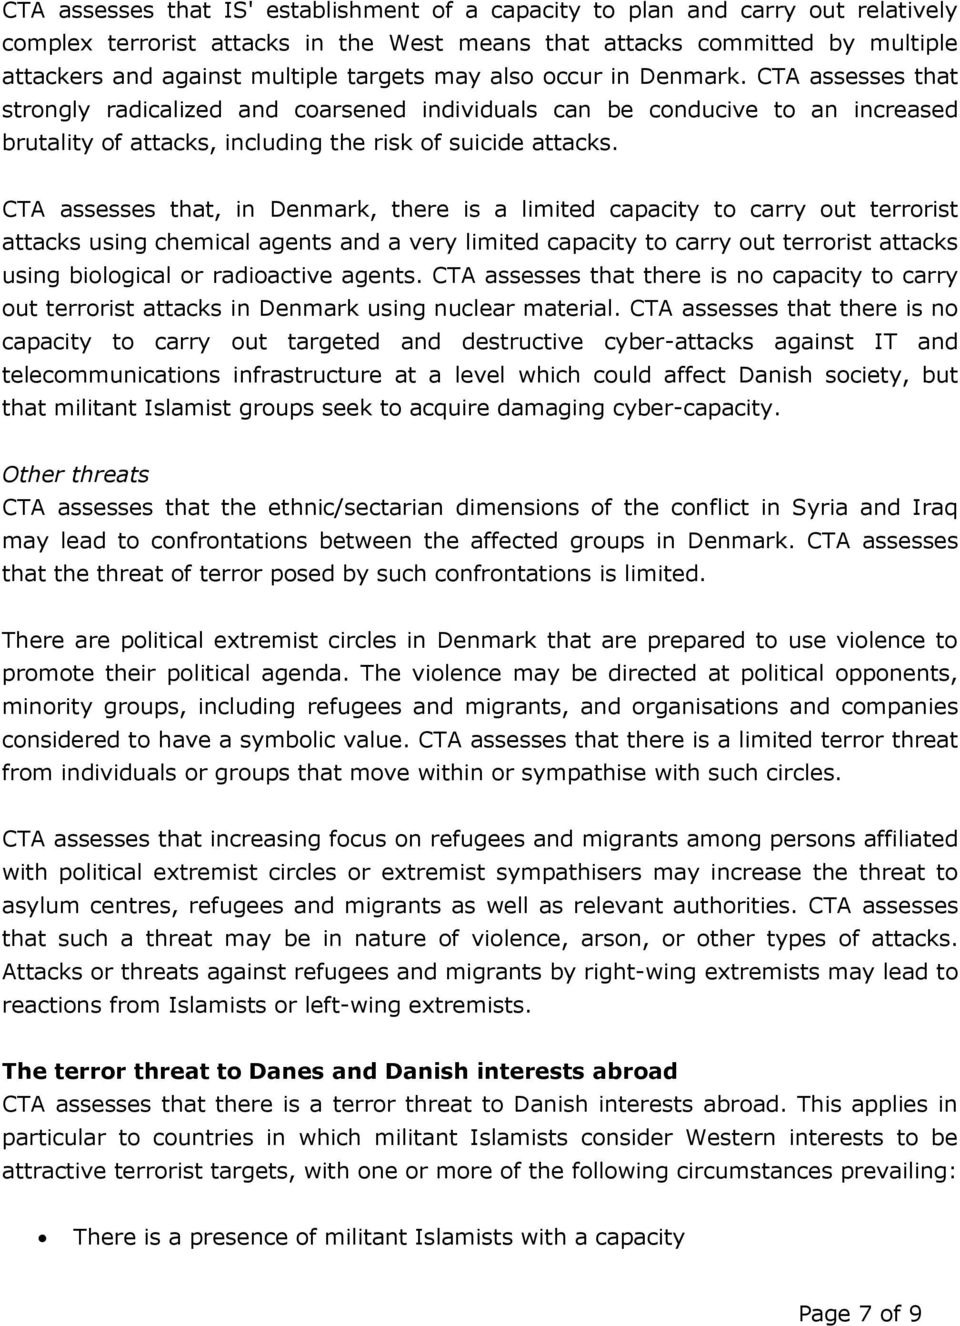 CTA assesses that, in Denmark, there is a limited capacity to carry out terrorist attacks using chemical agents and a very limited capacity to carry out terrorist attacks using biological or